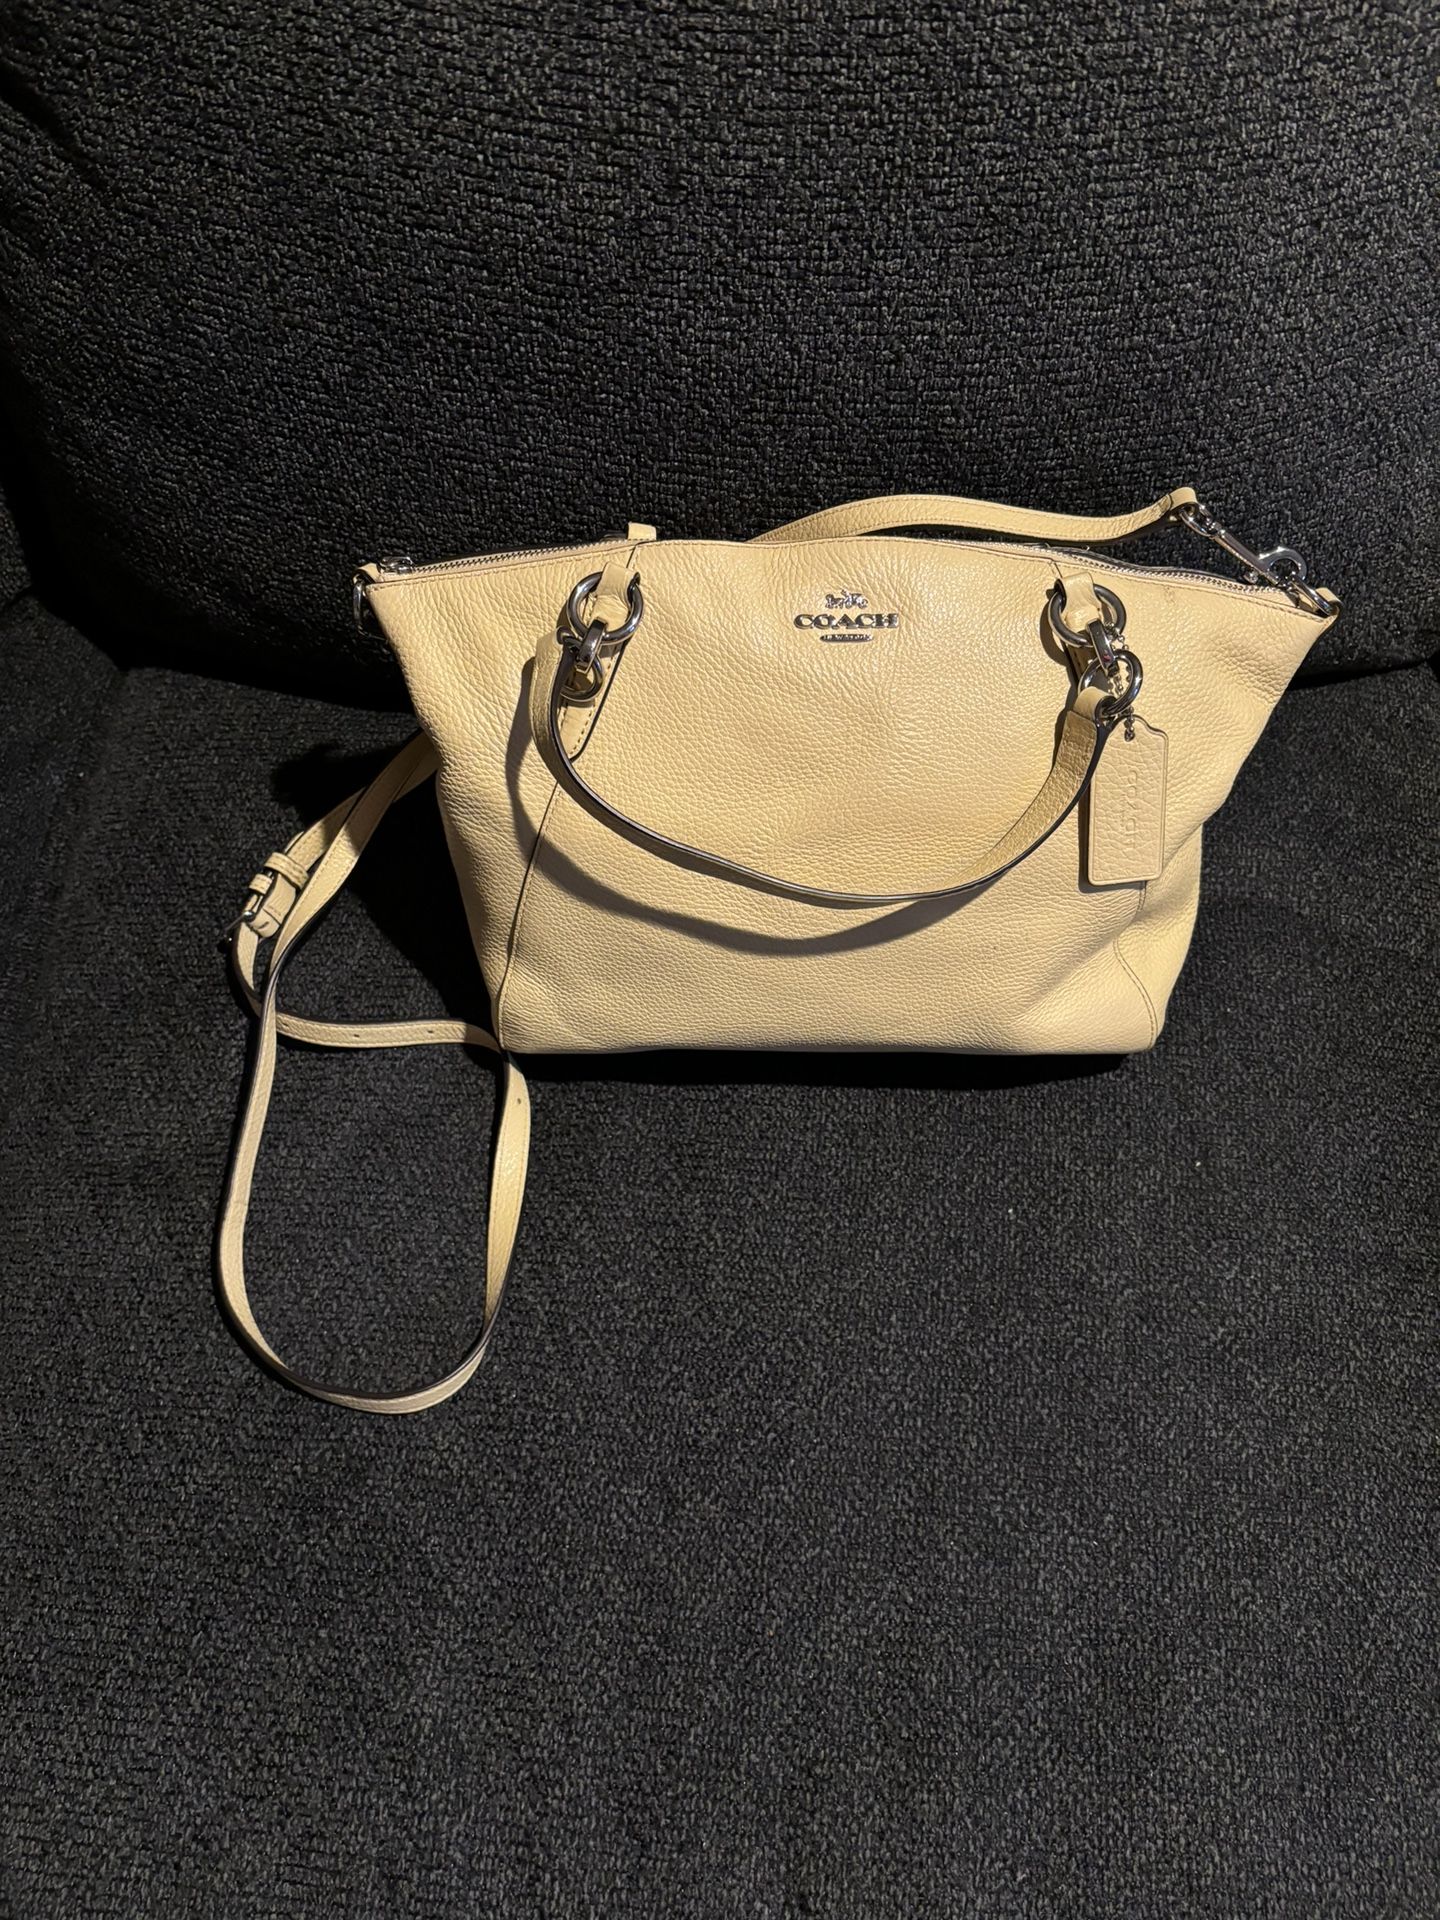 Coach Light Yellow leather Bag